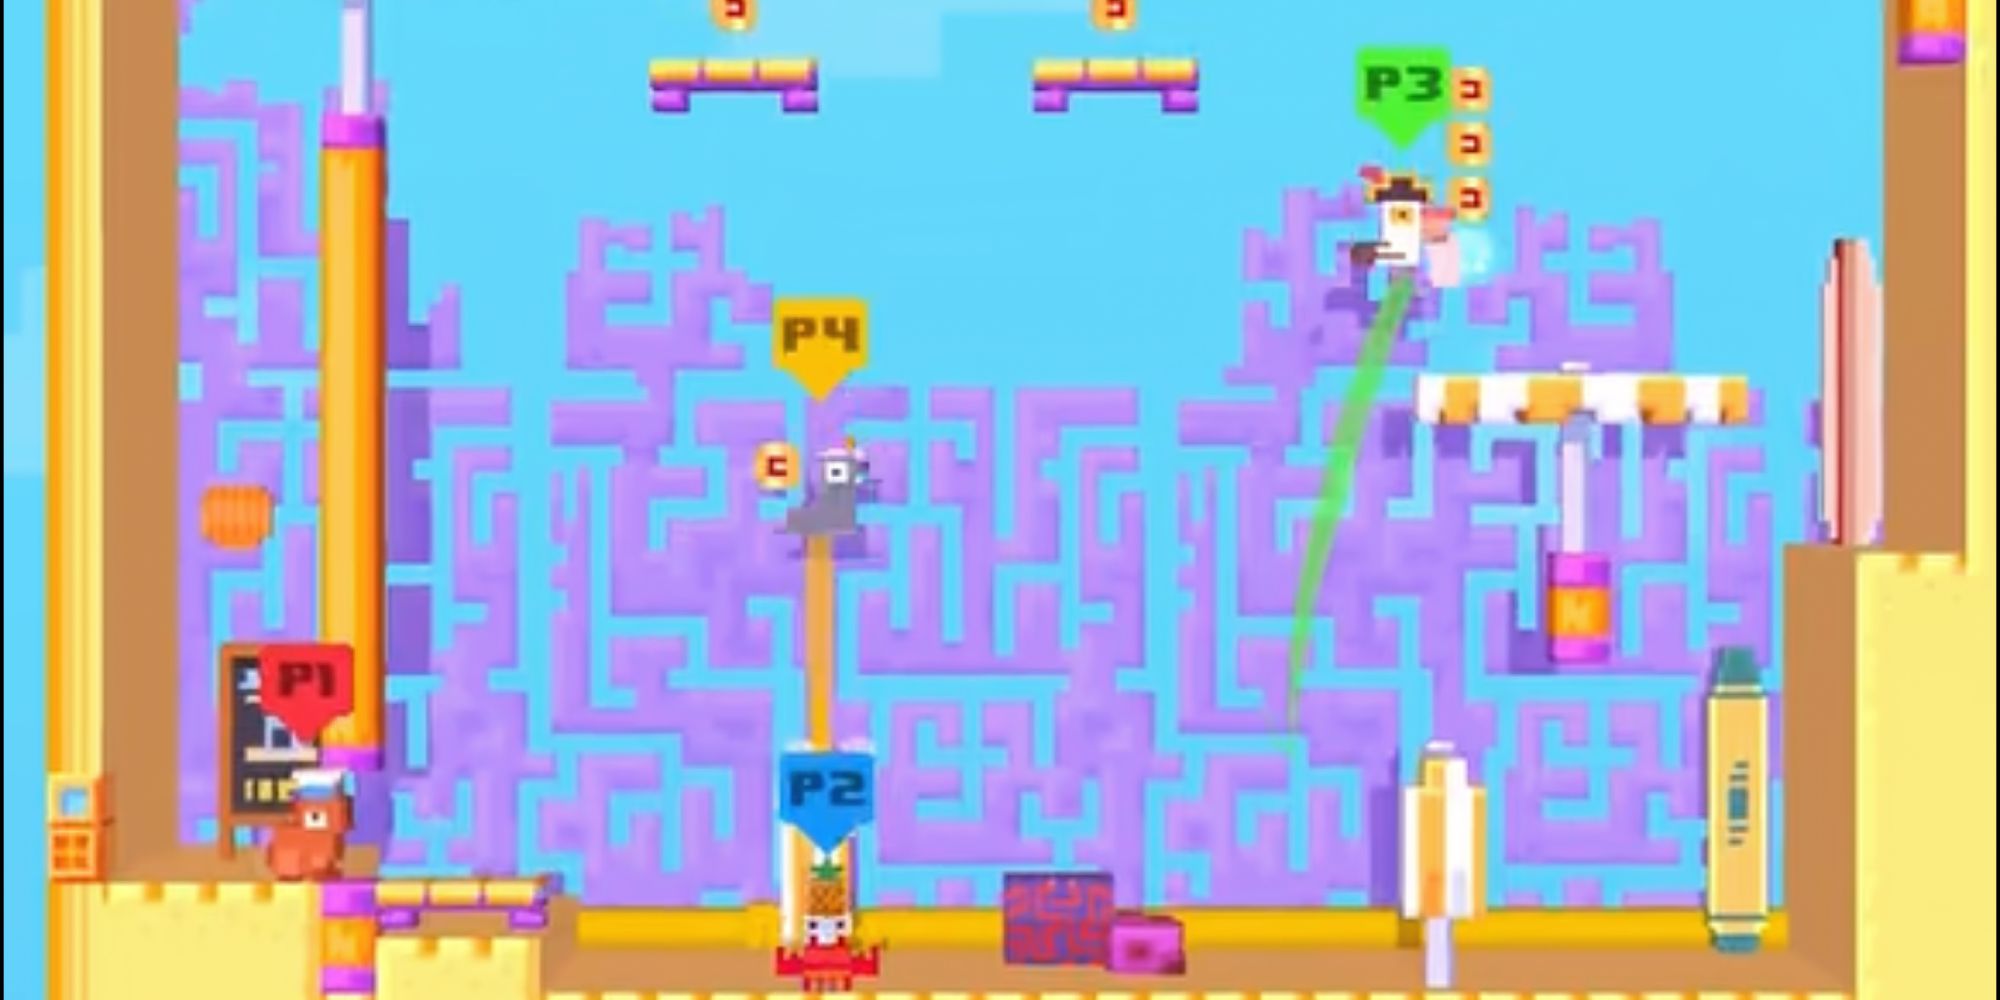 A friendly multiplayer game of Crossy Road Castle with four players, namely, P1, P2, P3 and P4